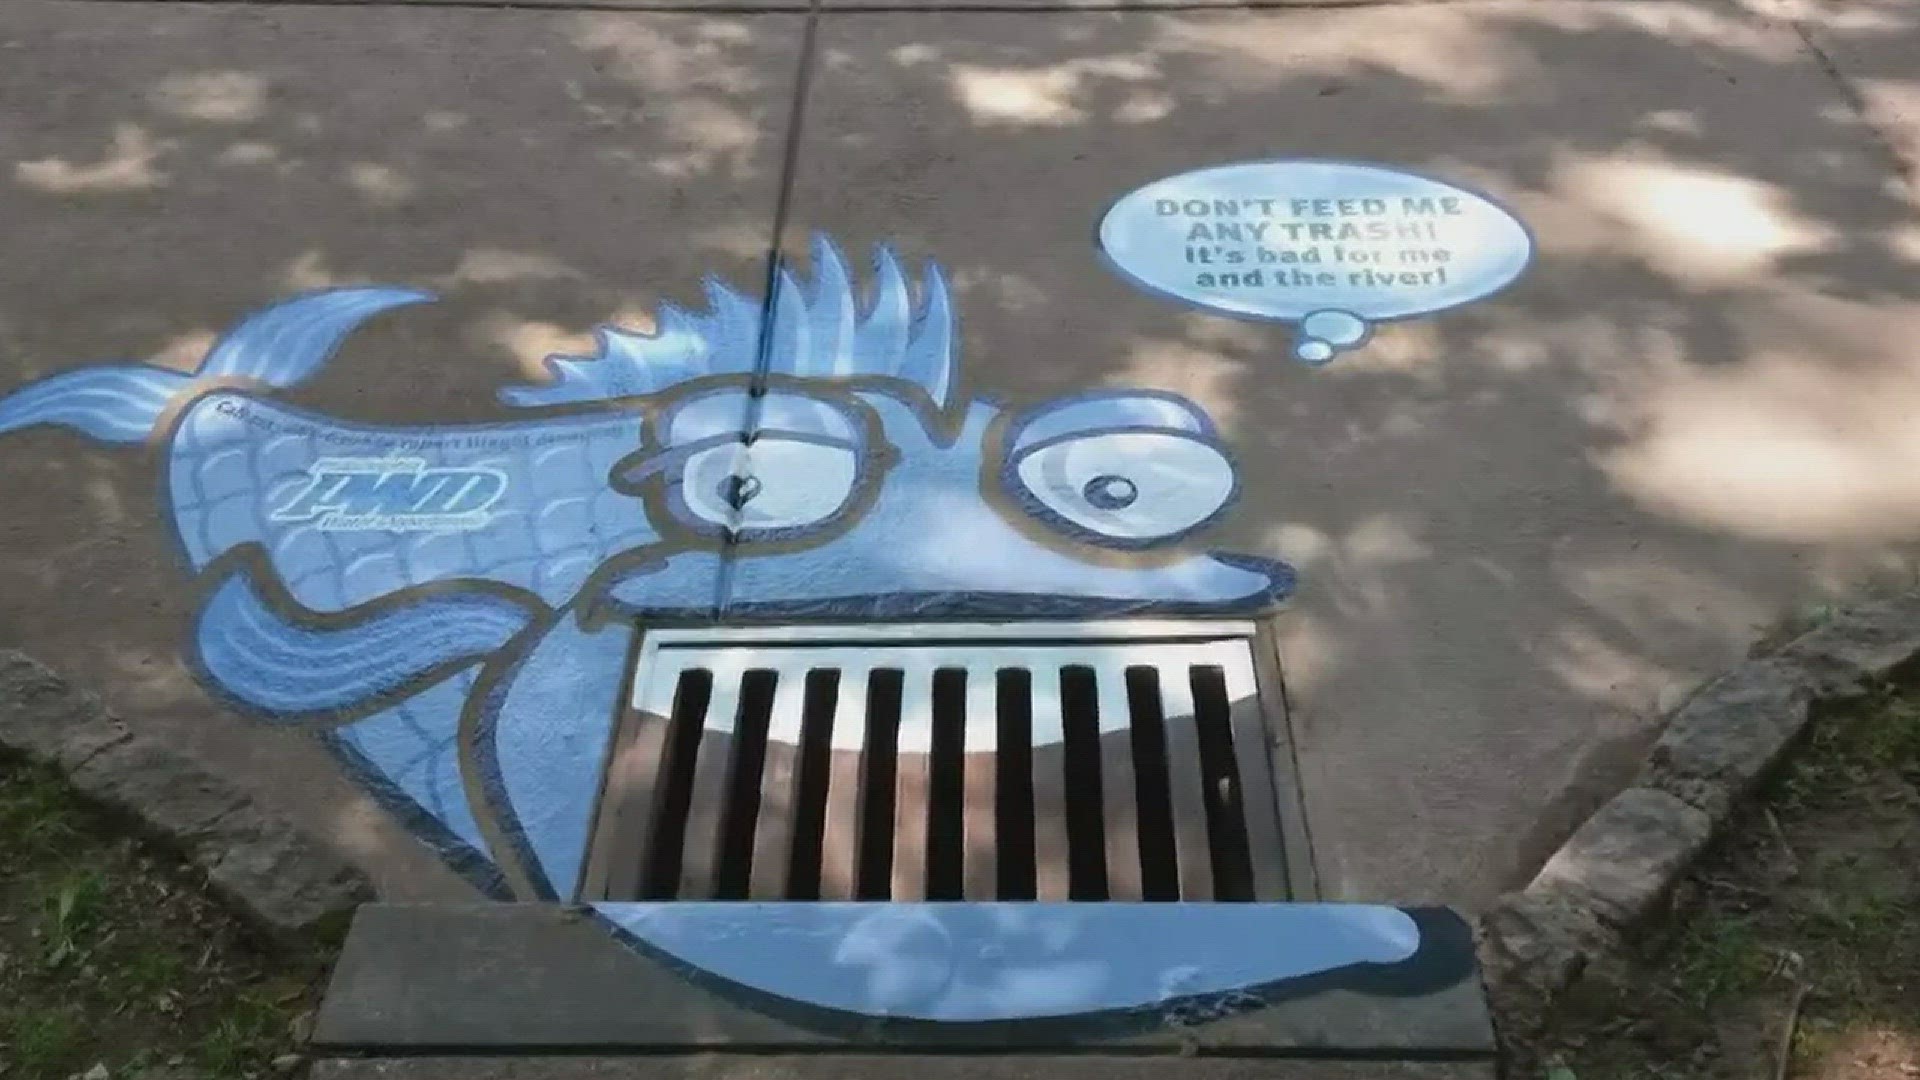 The Knox County storm water department is adding public art installations to storm drains.  Artists can submit applications to join the project on KnoxCounty.org